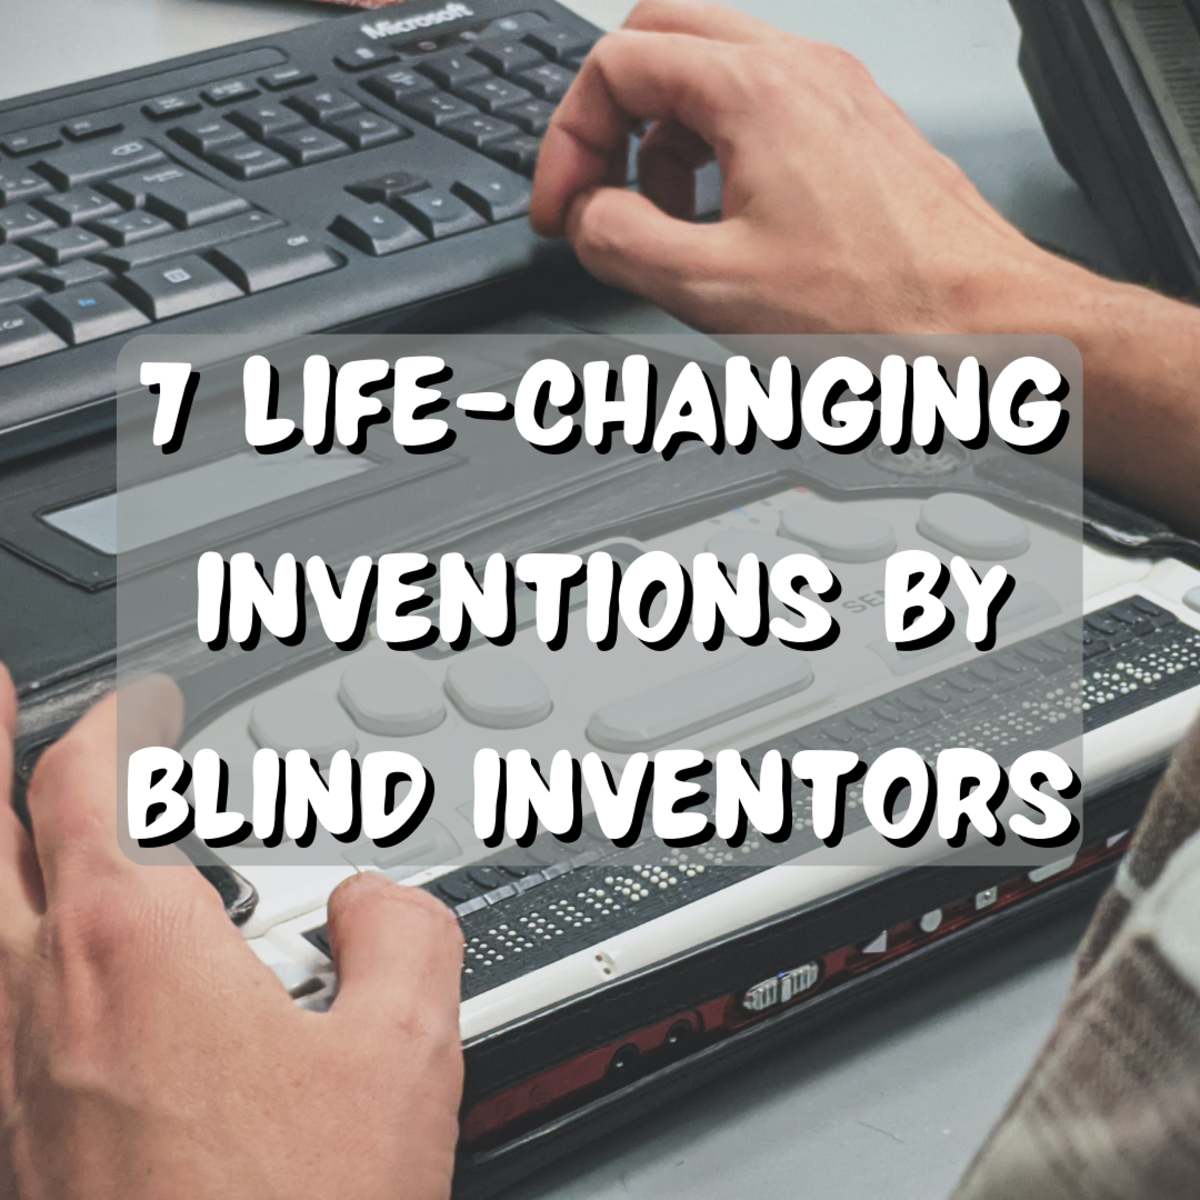 7 Life-Changing Inventions by Blind Inventors